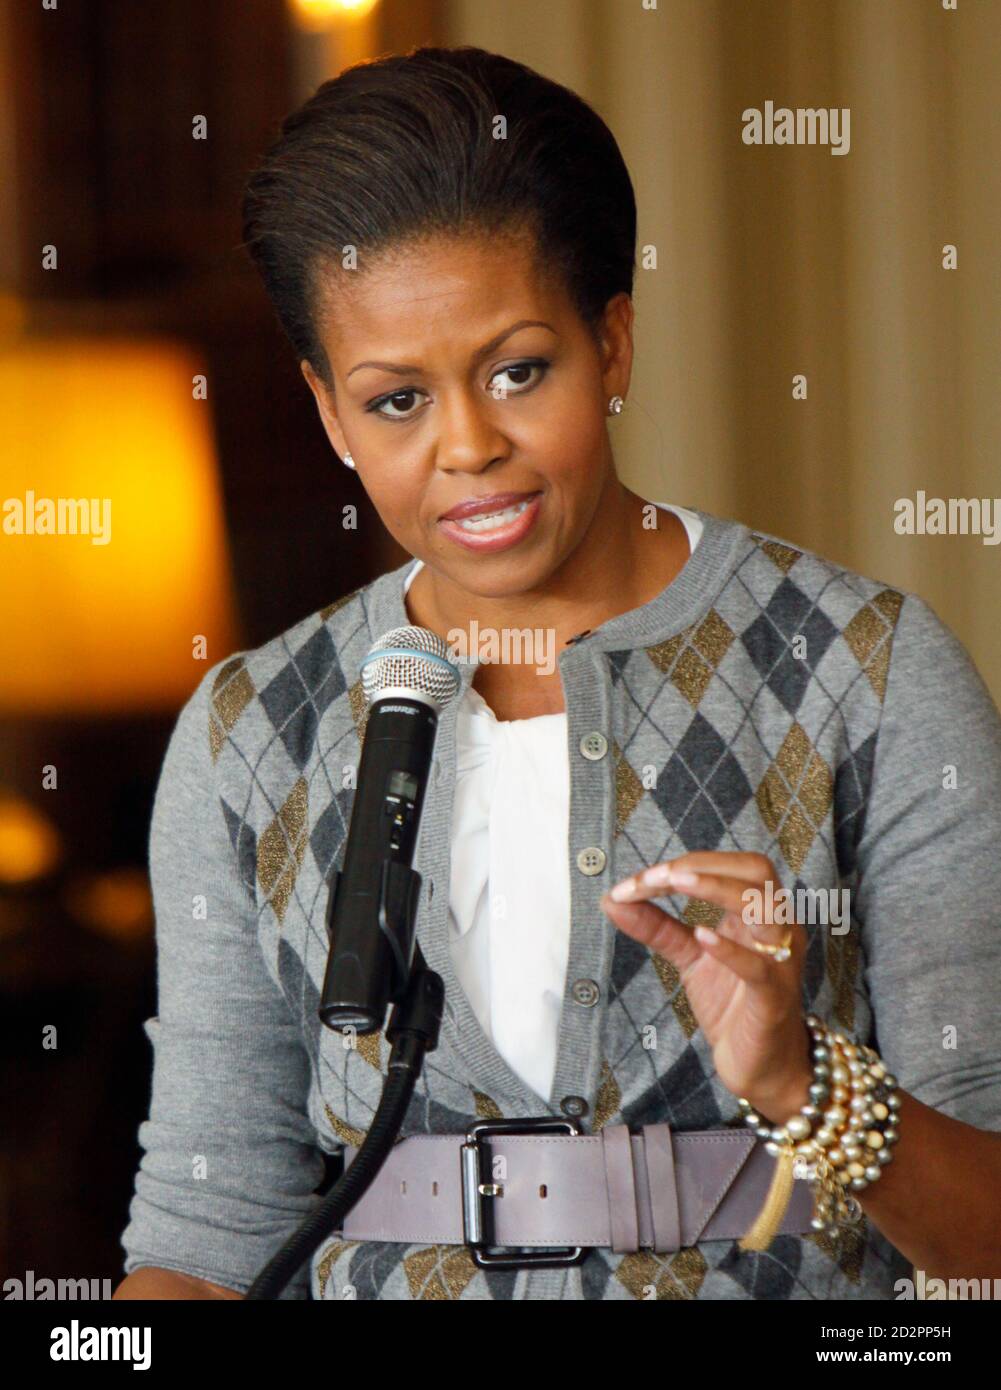 U.S. first lady Michelle Obama speaks at a Girls Mentoring Luncheon at the Governor's Mansion in Denver, Colorado November 16, 2009. REUTERS/Rick Wilking (UNITED STATES POLITICS EDUCATION) Stock Photo